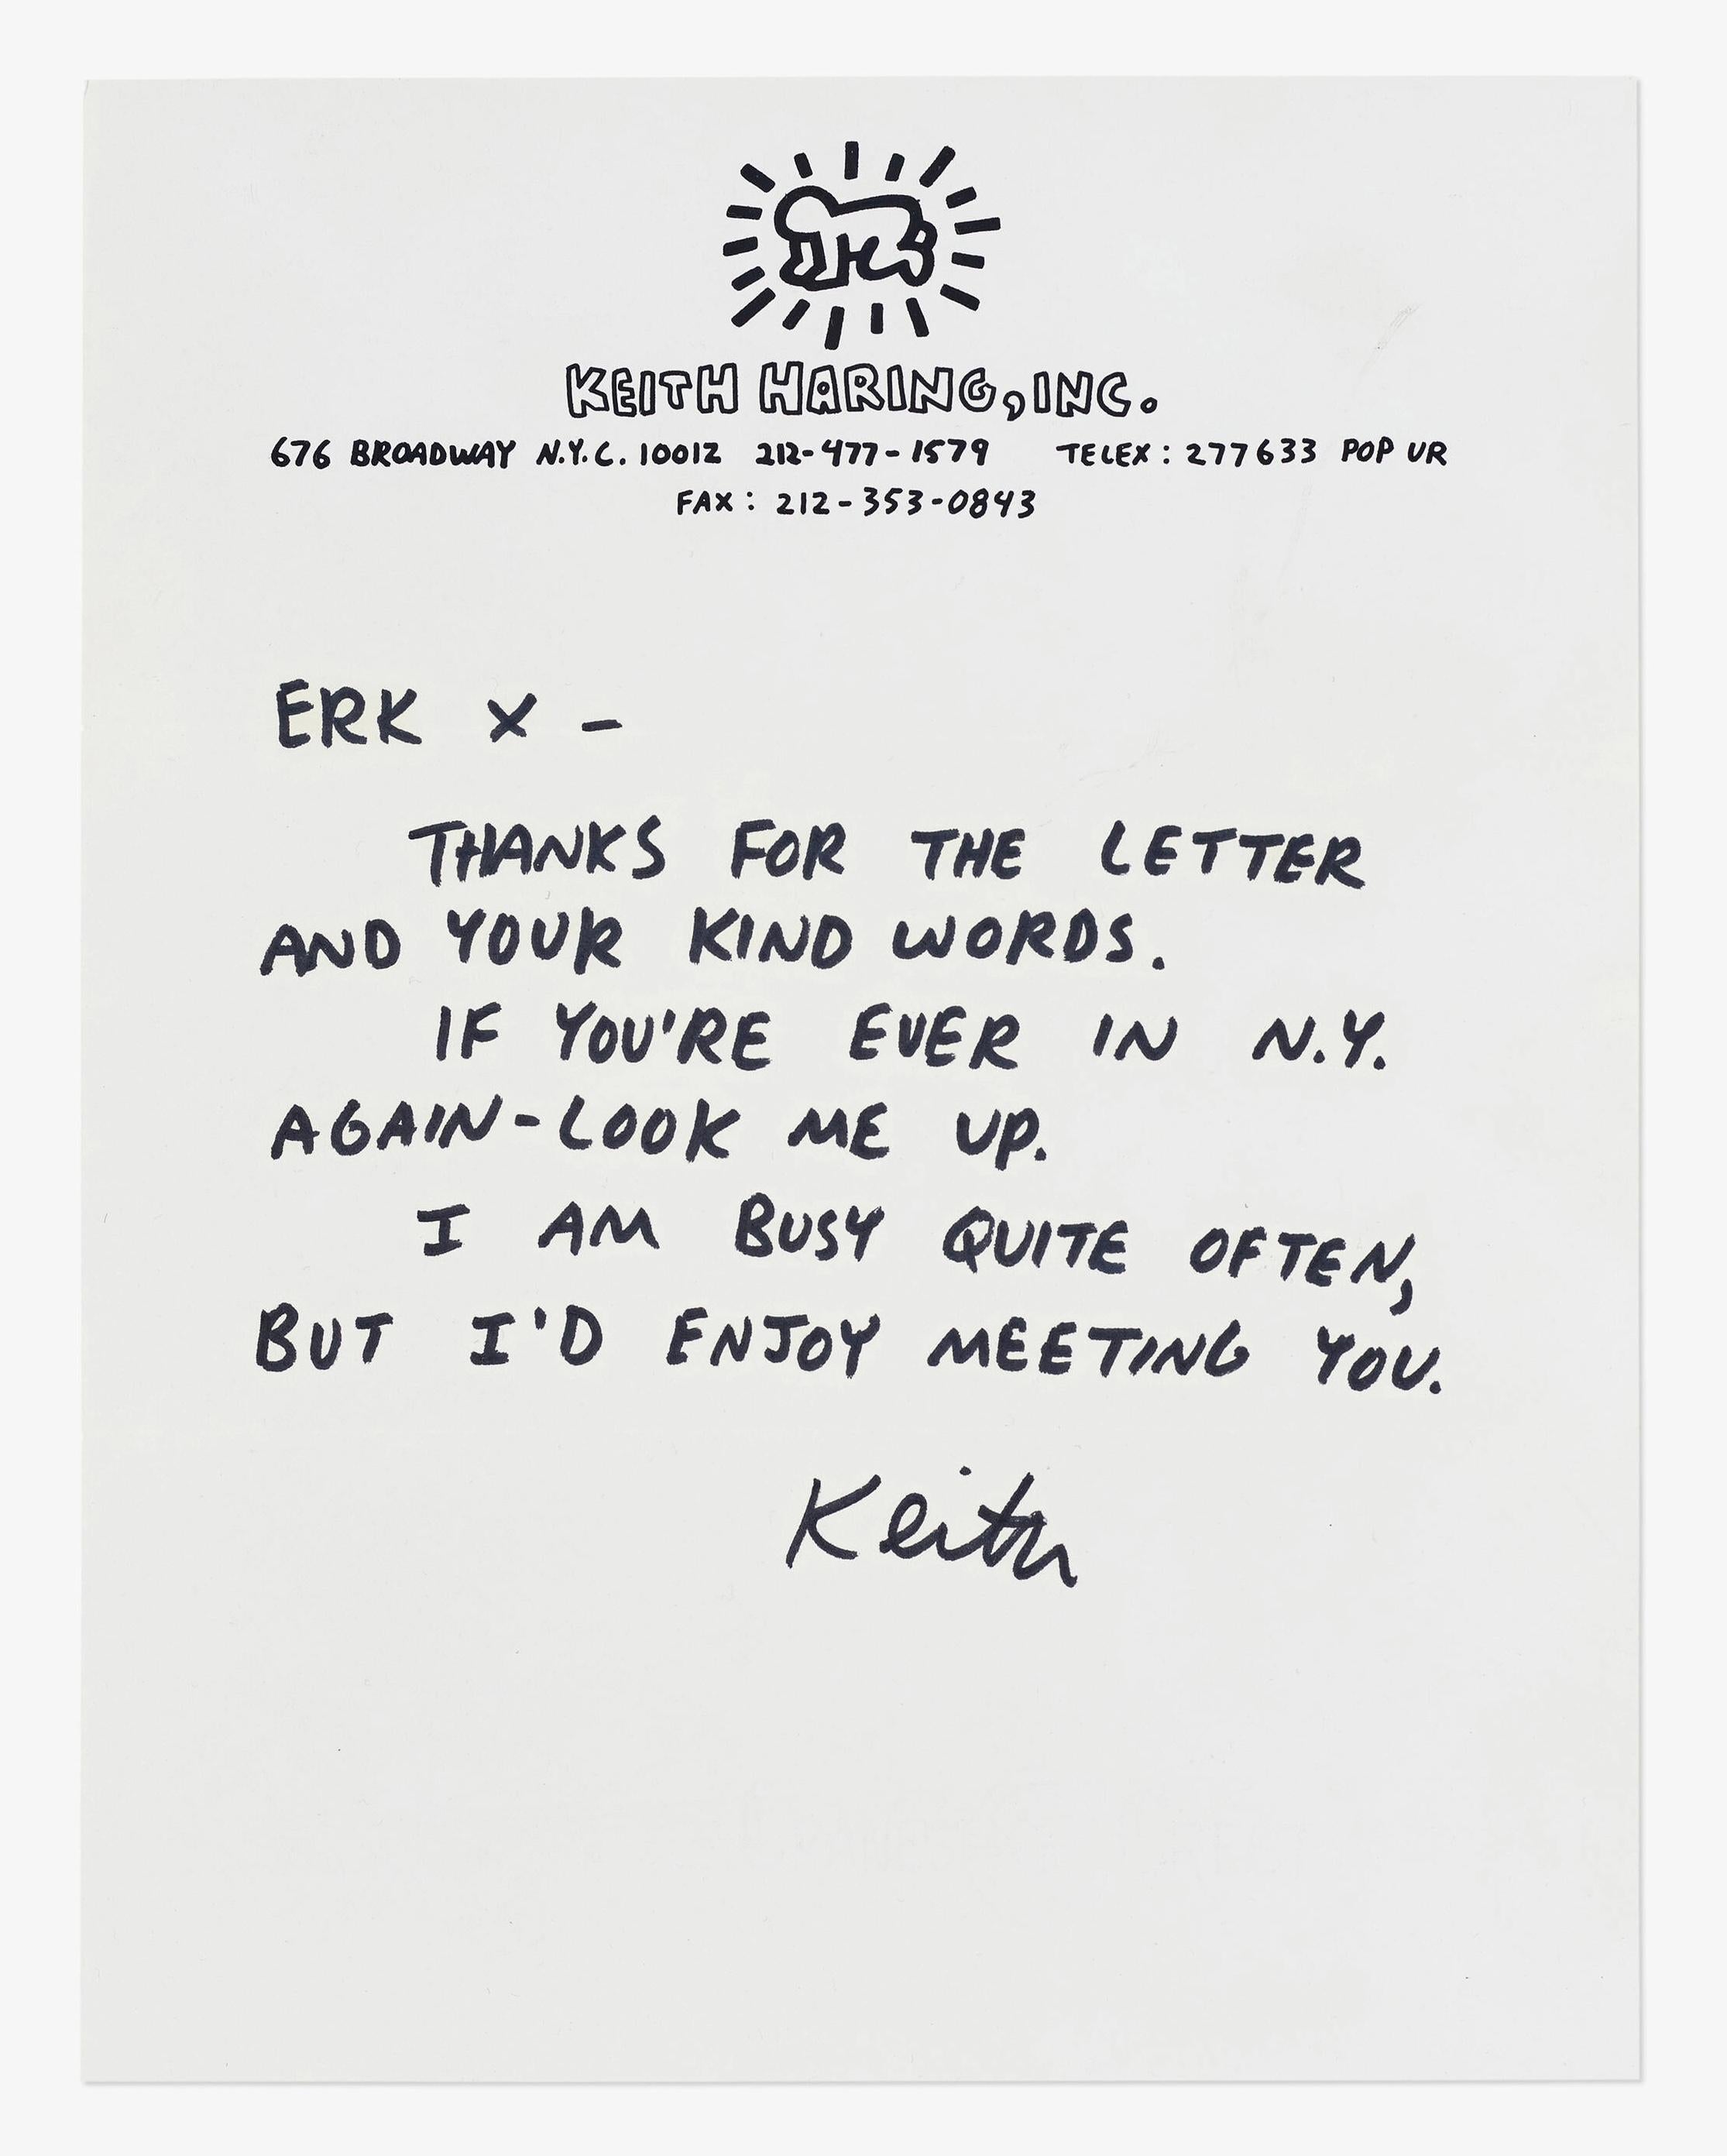 Keith Haring handwritten letter 1989:
A rare 1989 handwritten letter by Keith Haring executed on the artist's personal stationary. An endearing personal response by Haring to a young aspiring artist stationed in the US military. Signed Keith to the